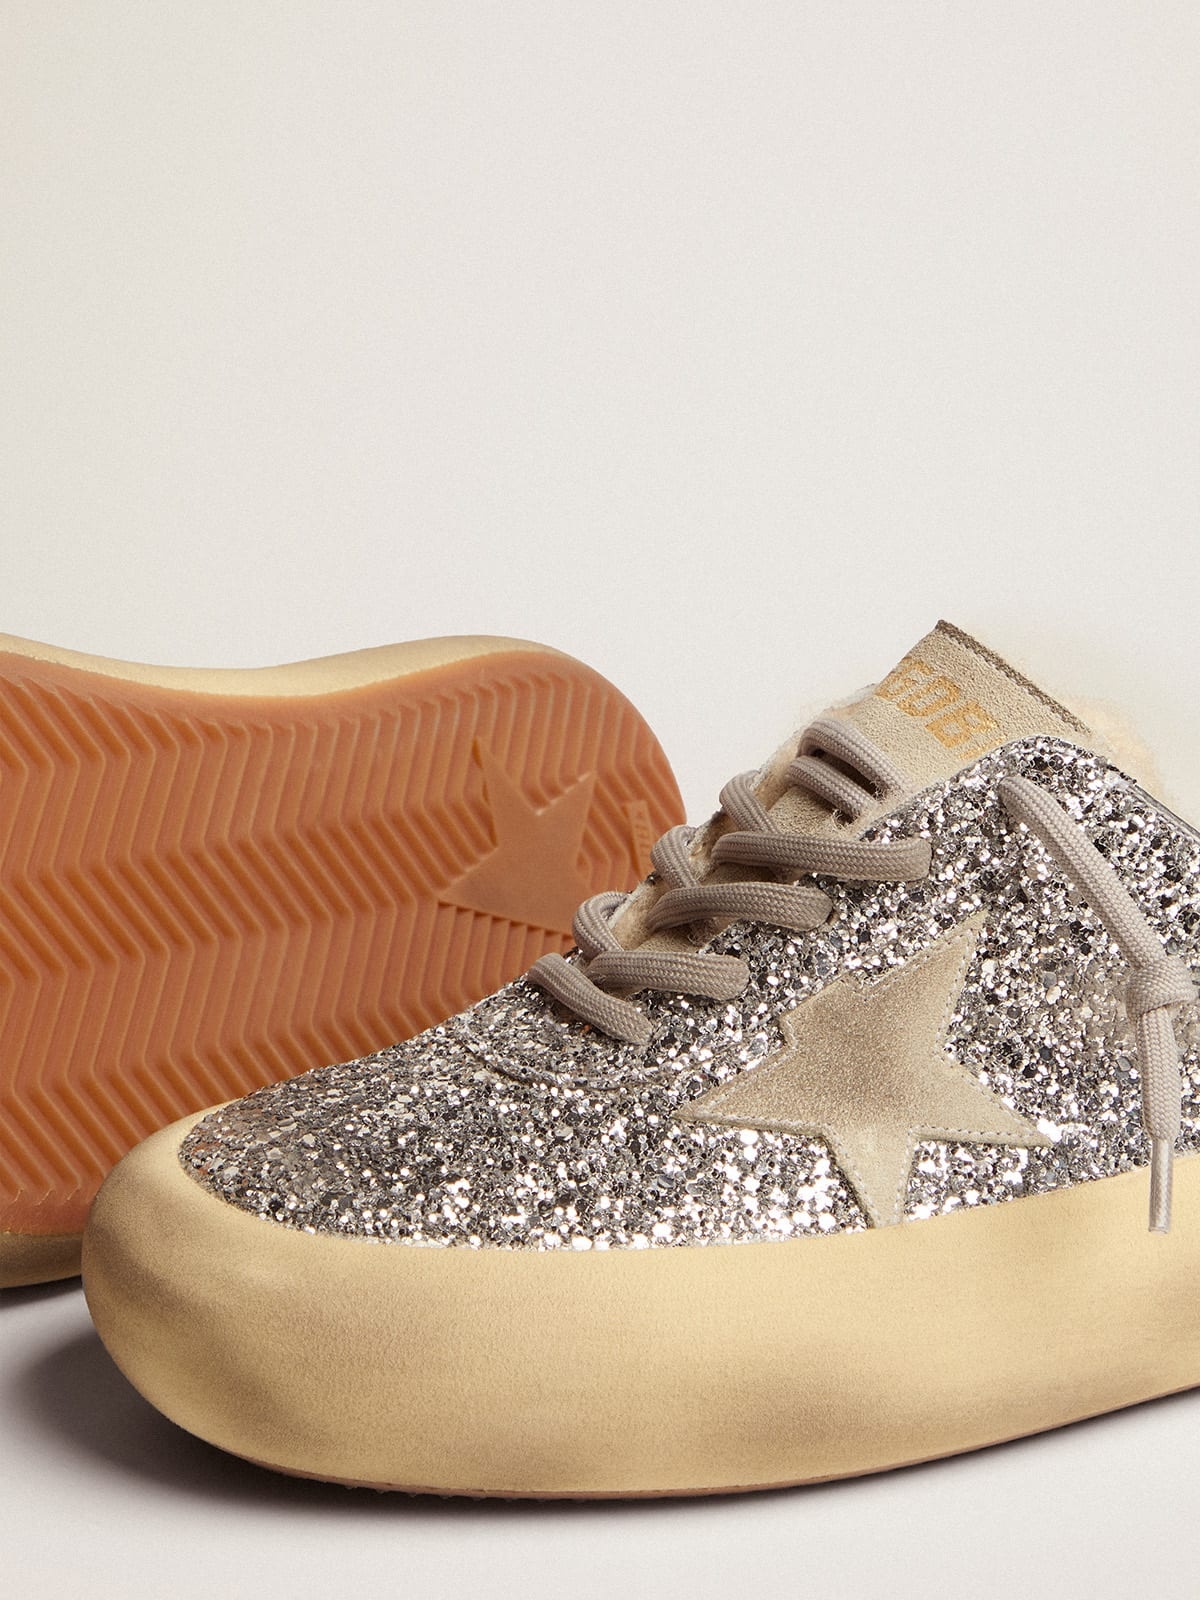 Space-Star Sabot shoes in silver glitter with shearling lining - 4